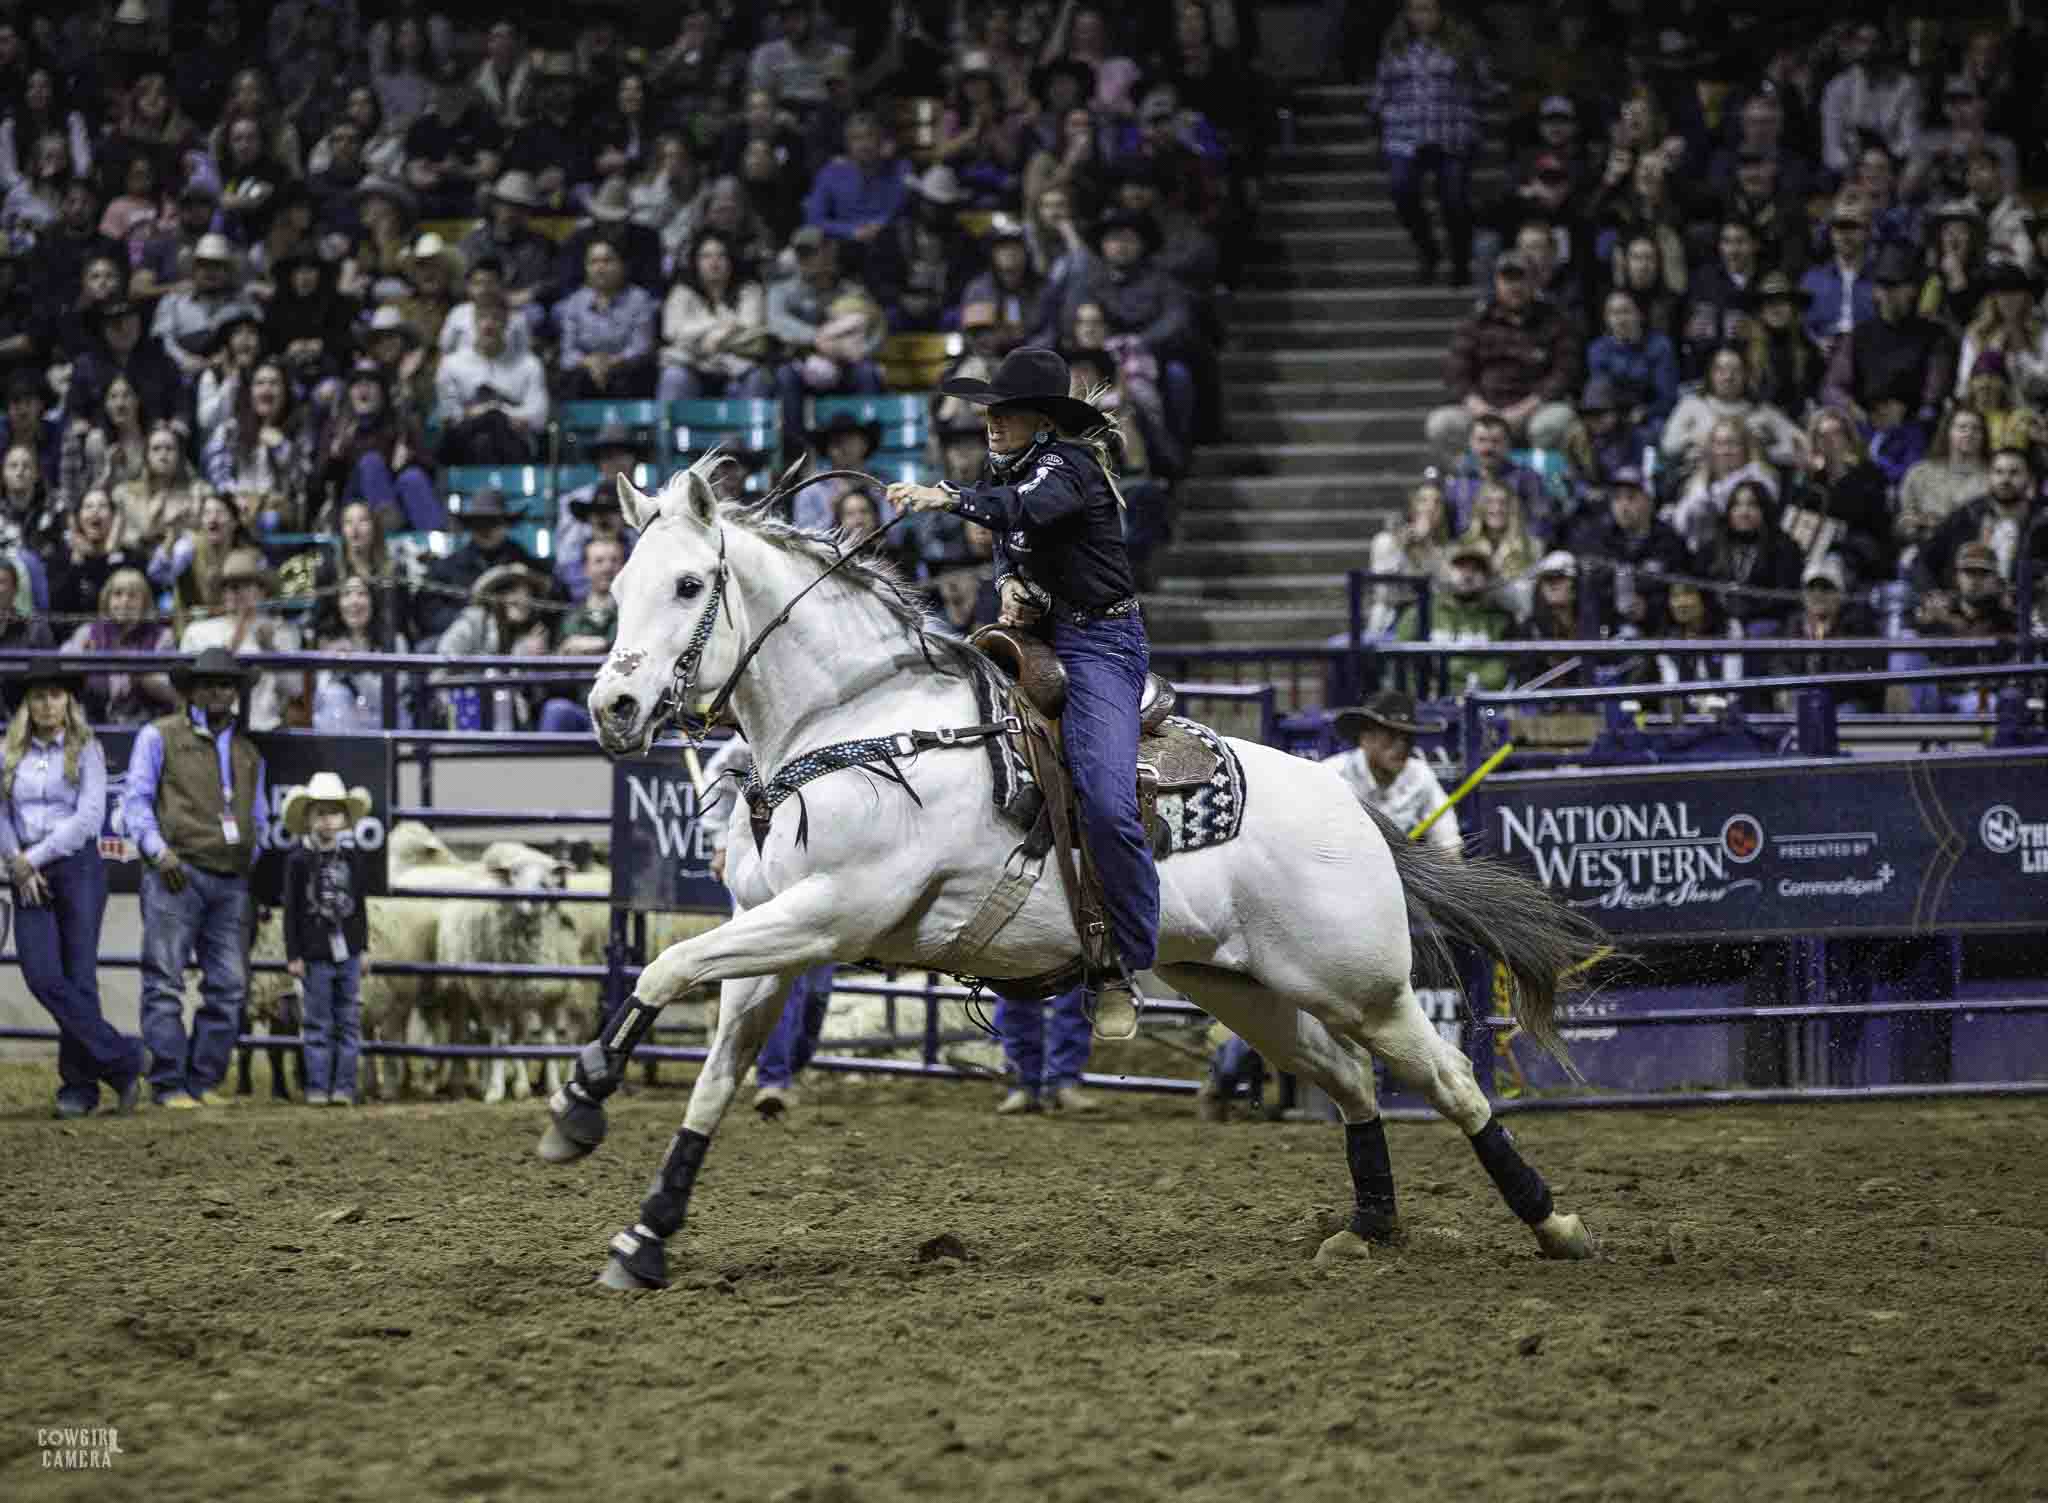 Barrel Racer on Beautiful Gray horse, running for home